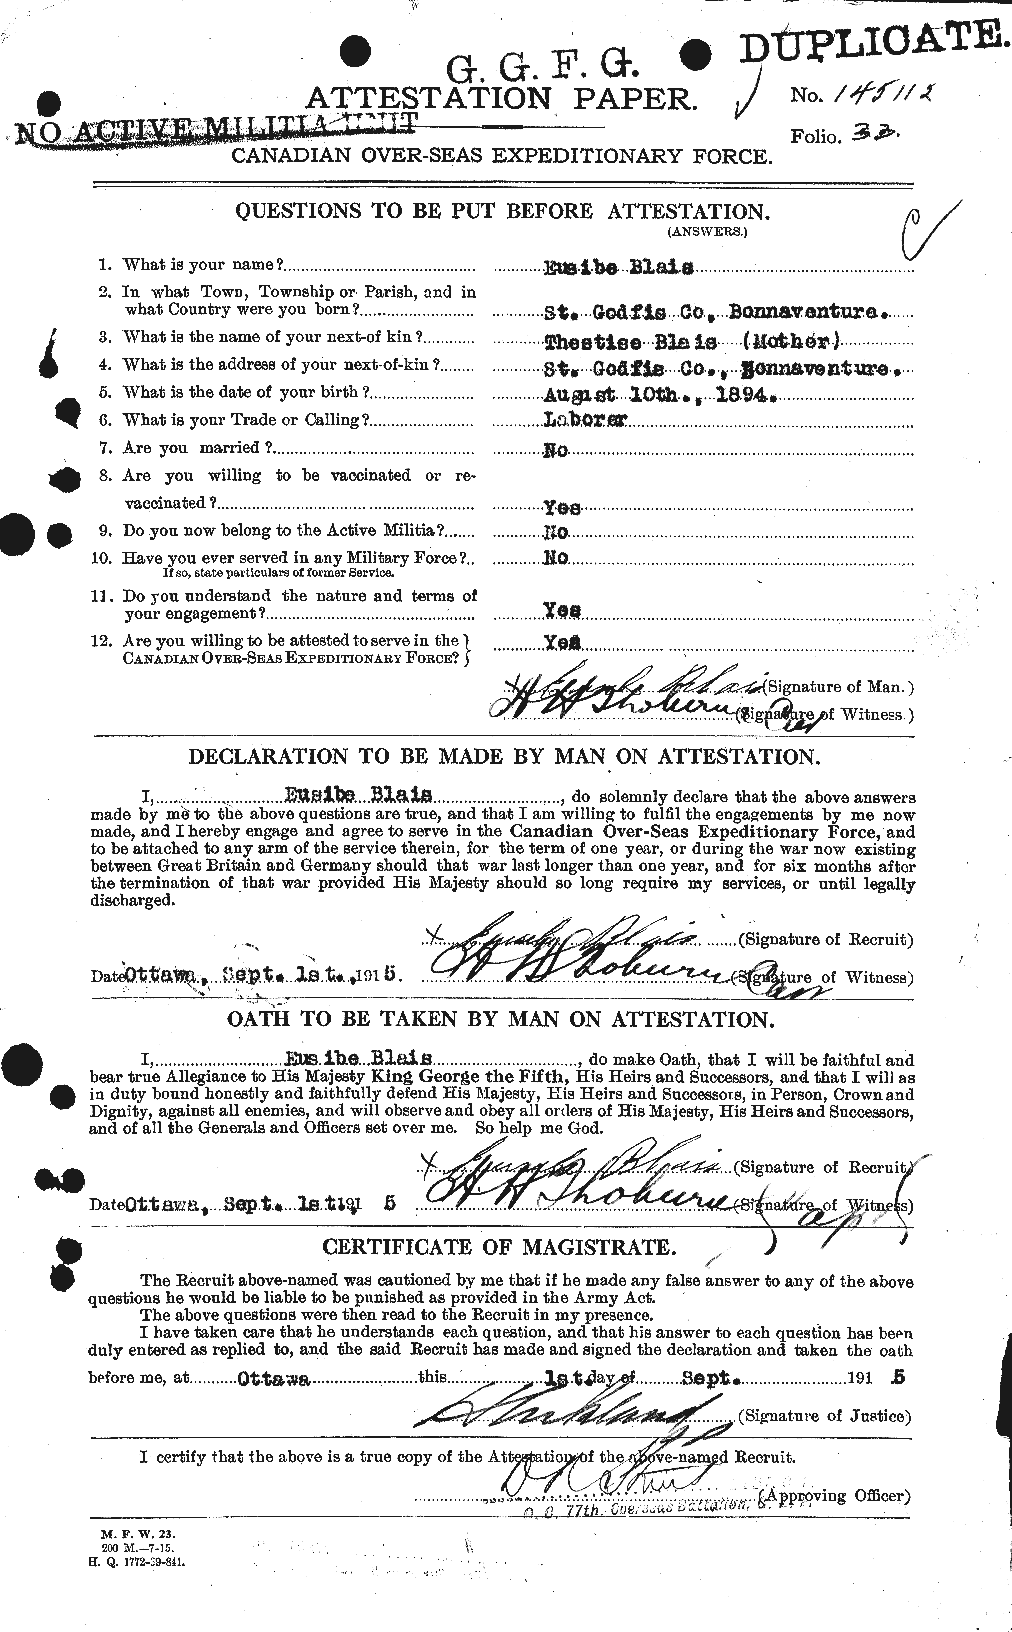 Personnel Records of the First World War - CEF 245419a